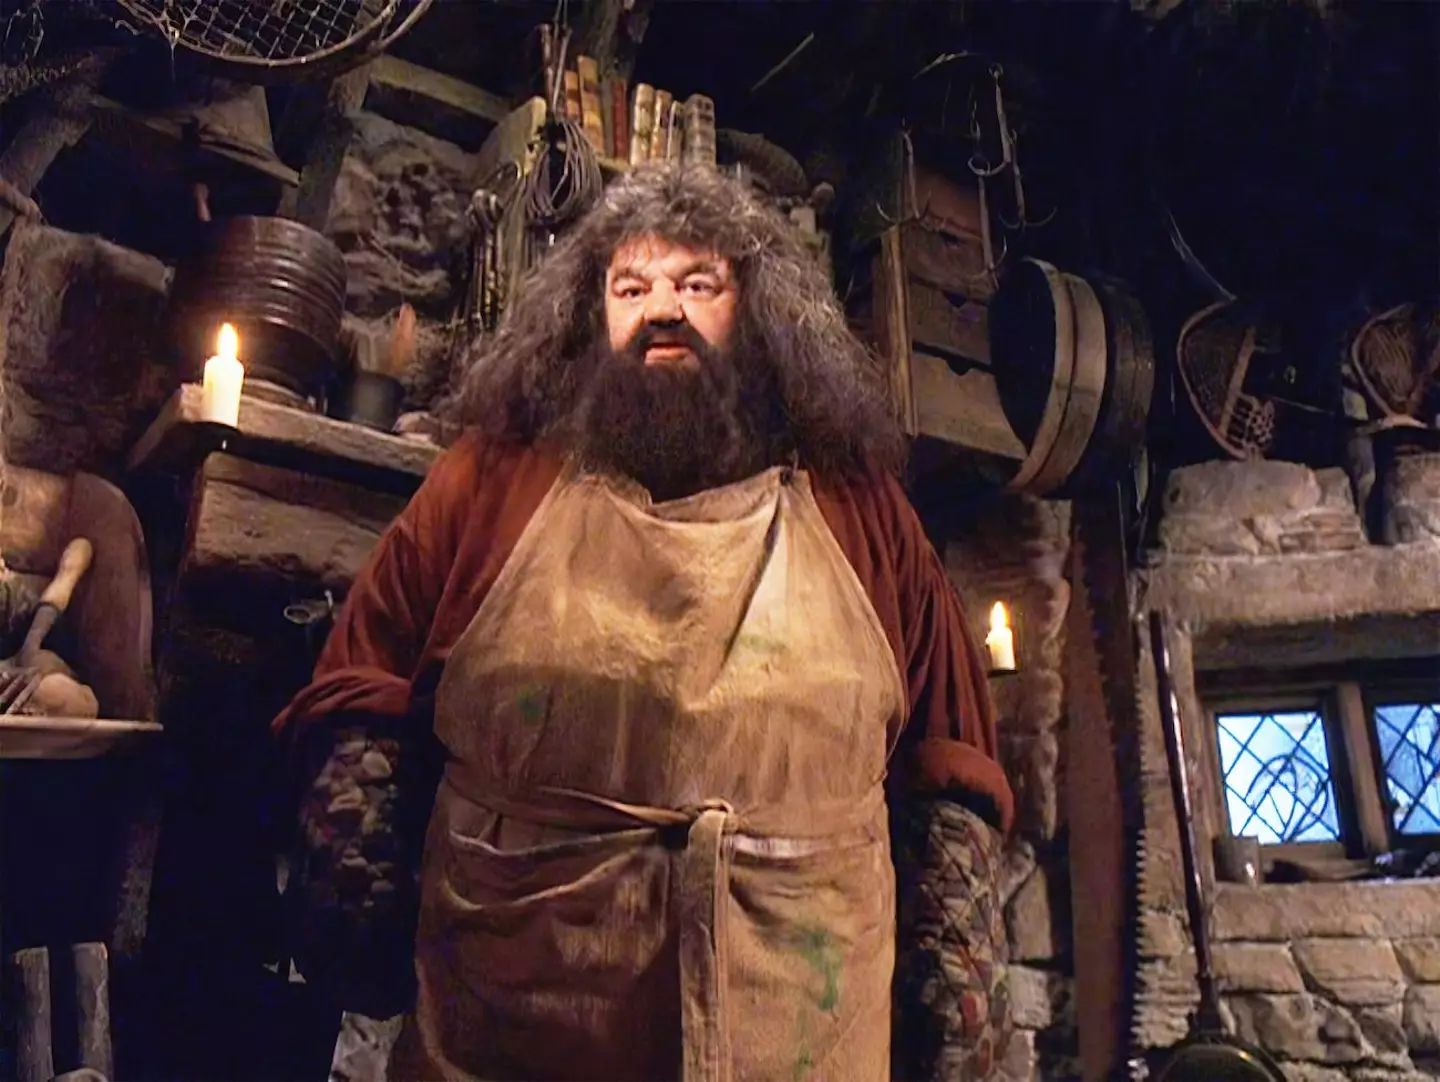 Robbie Coltrane as Rubeus Hagrid in Harry Potter and the Philosophers Stone.